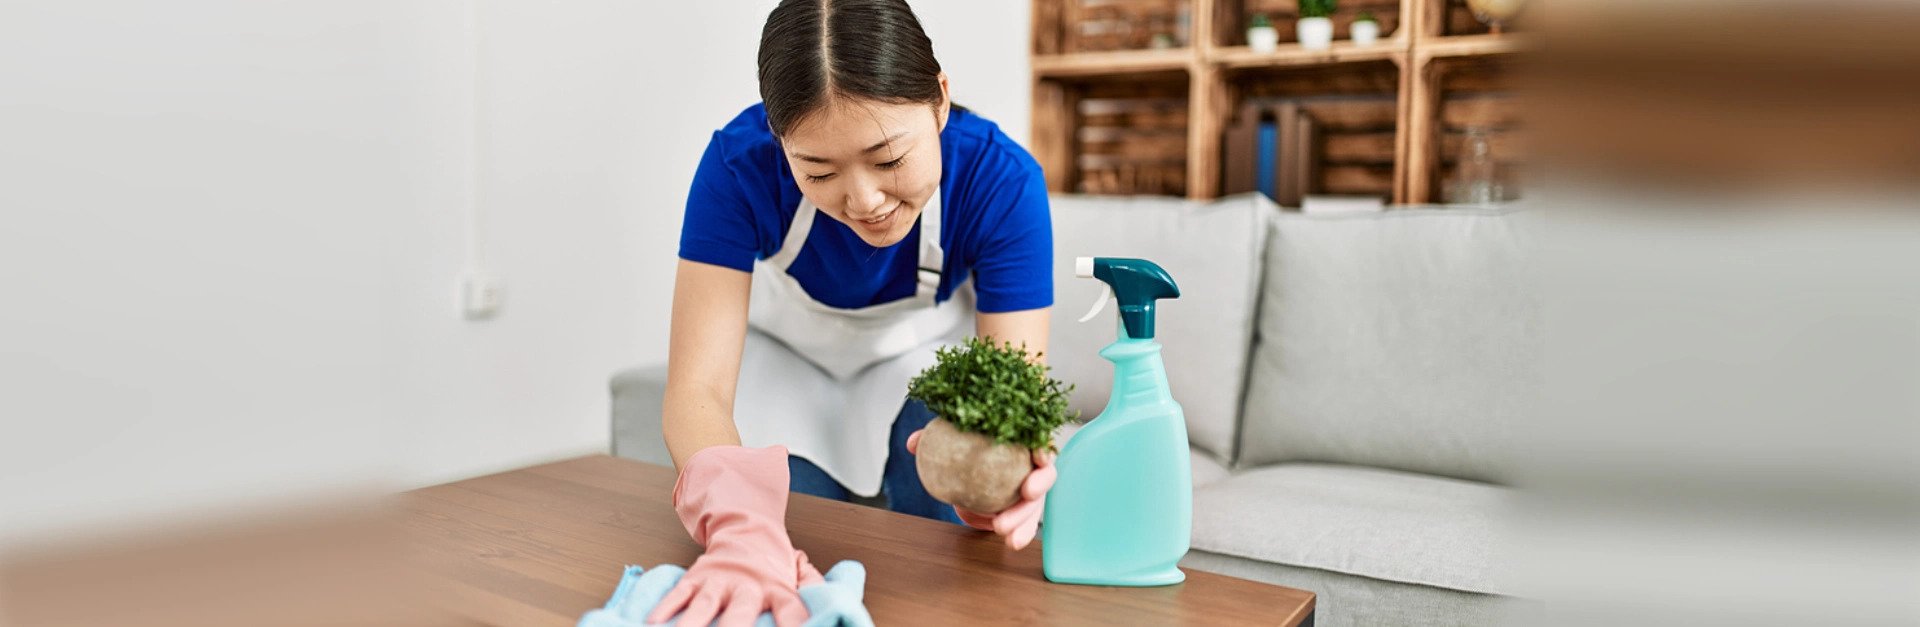 4 Key Areas Your Domestic Helper Insurance Should Cover